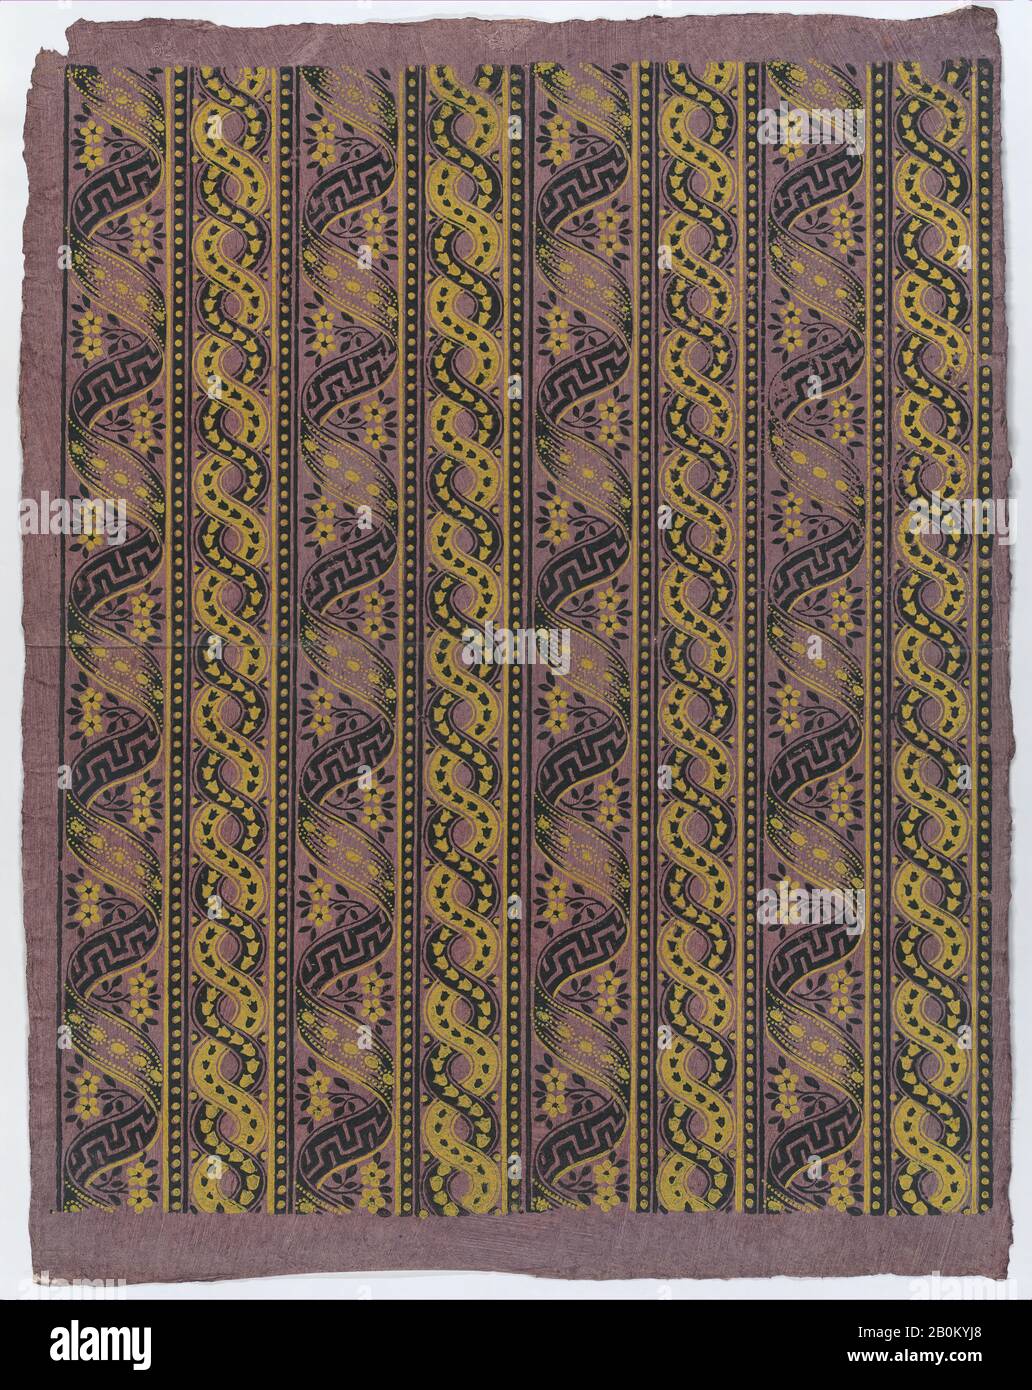 Anonymous, Sheet with four borders with guilloche and ribbon patterns, Anonymous, Italian, late 18th-mid 19th century, Possibly by Remondini Family (Italian, 1649–1861), late 18th–mid-19th century, Relief print (wood or metal), Sheet: 14 5/16 × 18 7/16 in. (36.3 × 46.8 cm), Prints Stock Photo